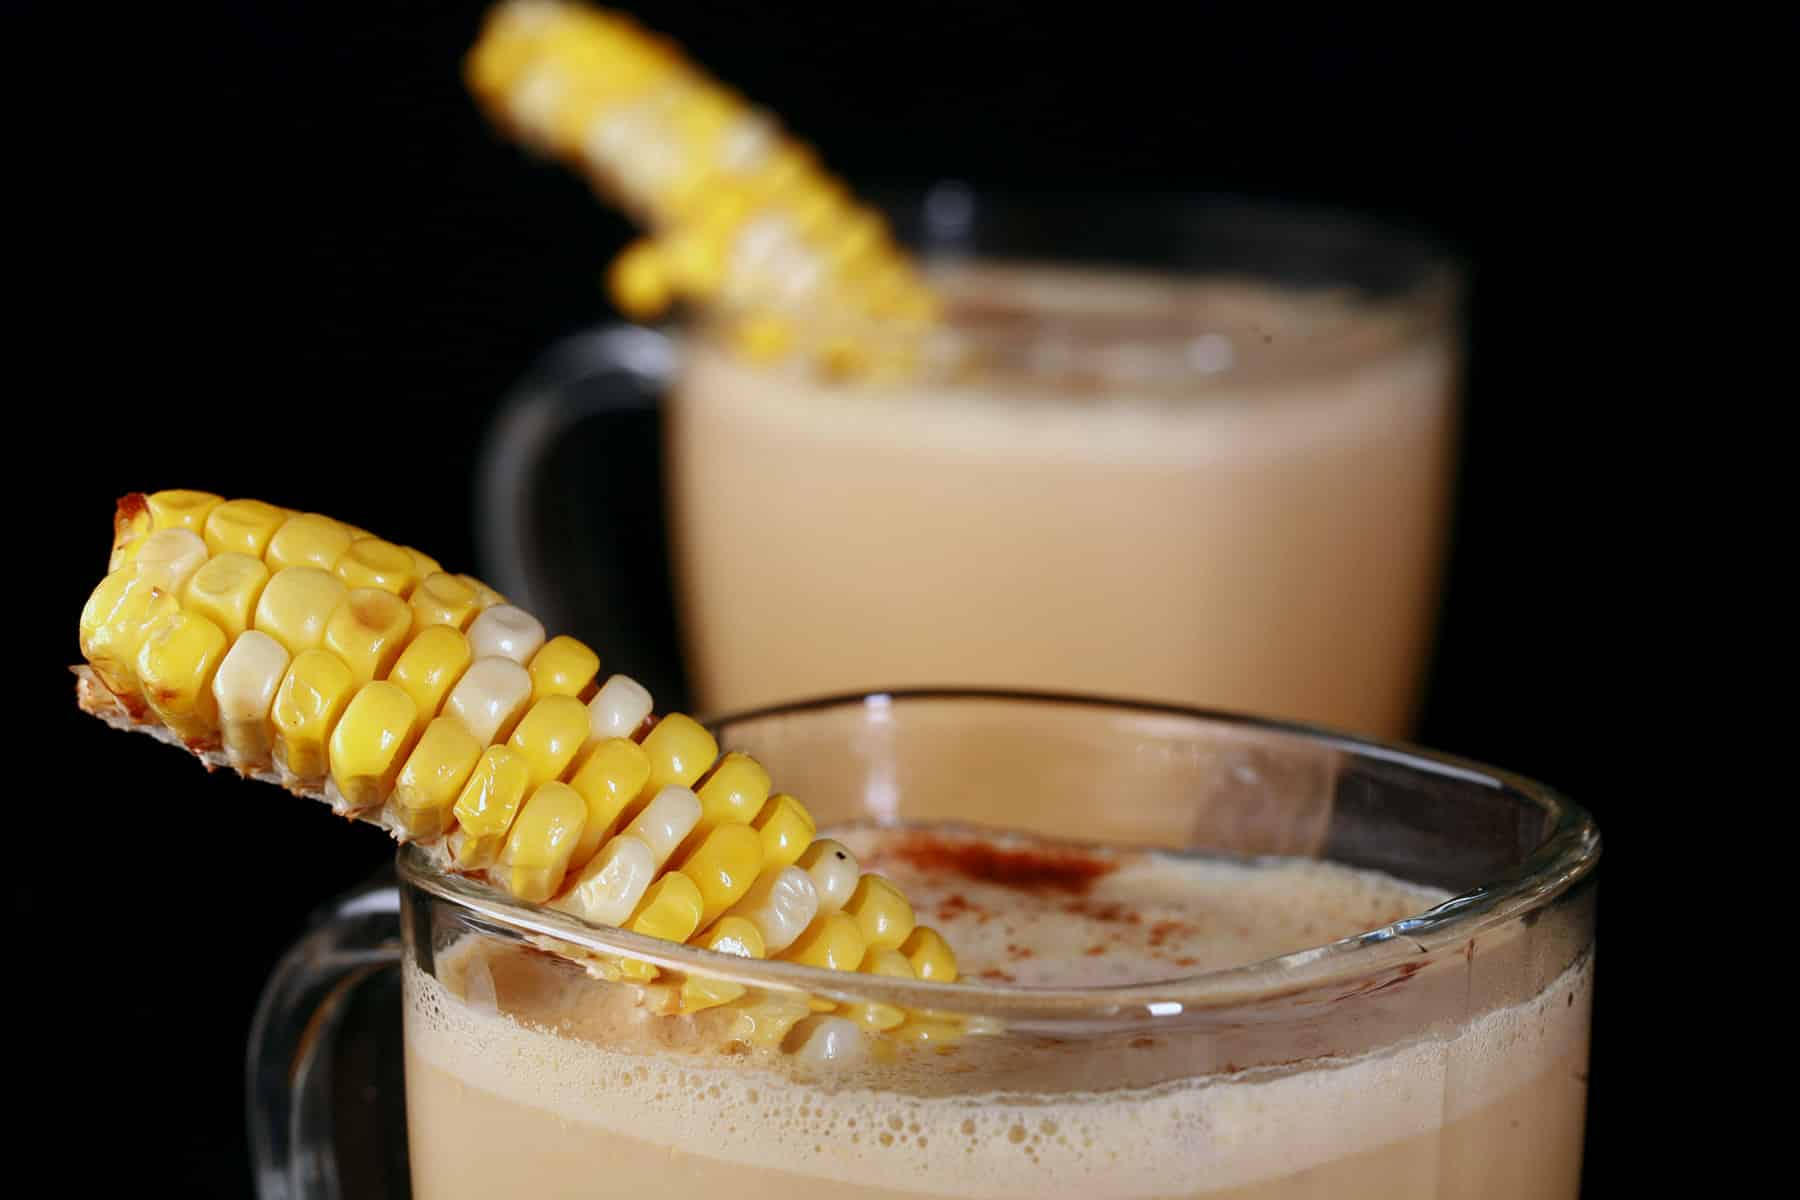 2 glass mugs of con cappuccino, garnished with narrow lengths of corn on the cob.